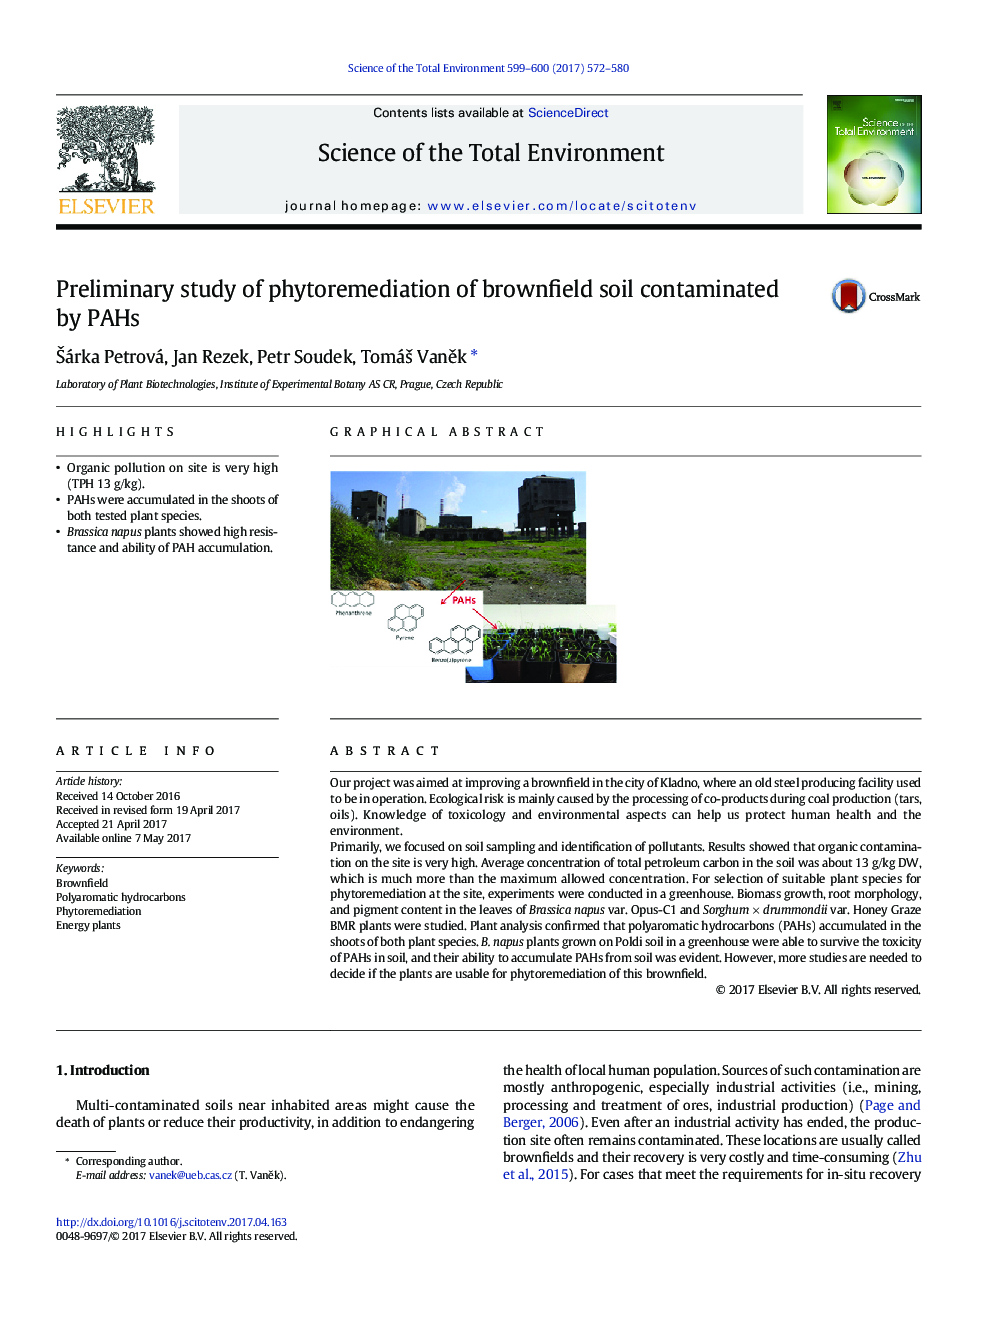 Preliminary study of phytoremediation of brownfield soil contaminated by PAHs